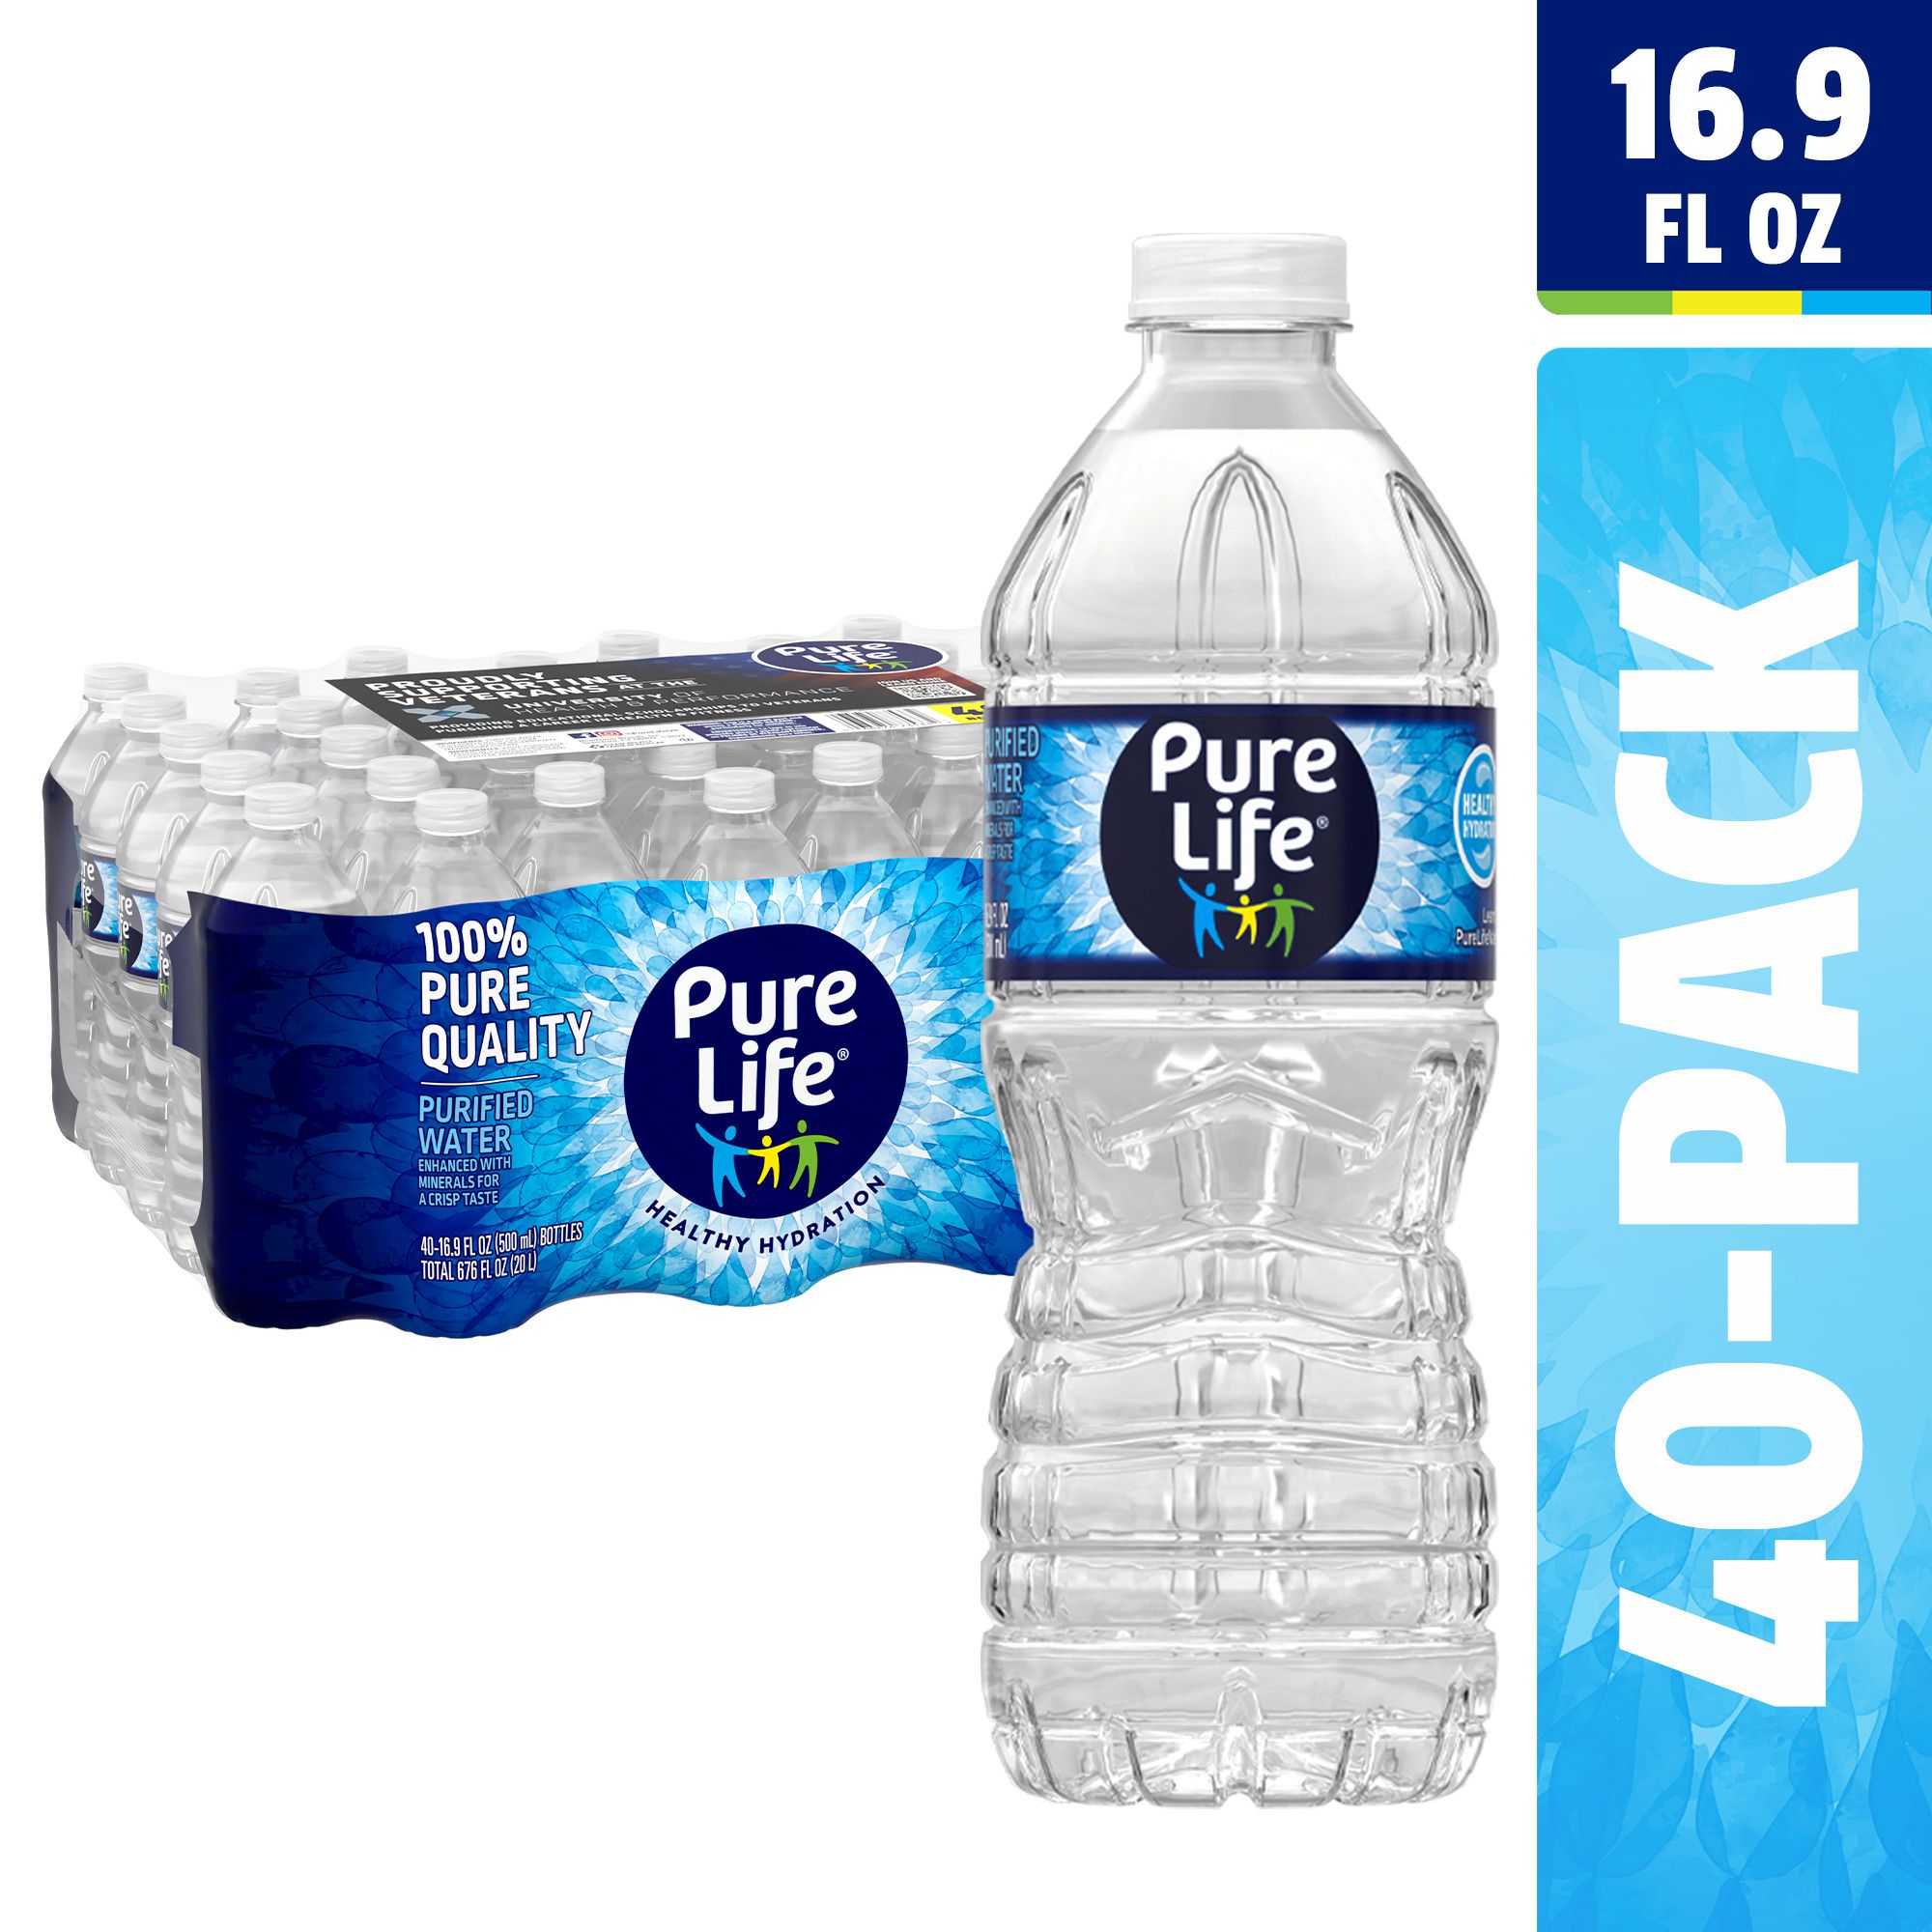 Pure Life Purified Water, Plastic Bottled Water, 40 pk./16.9 fl. oz.